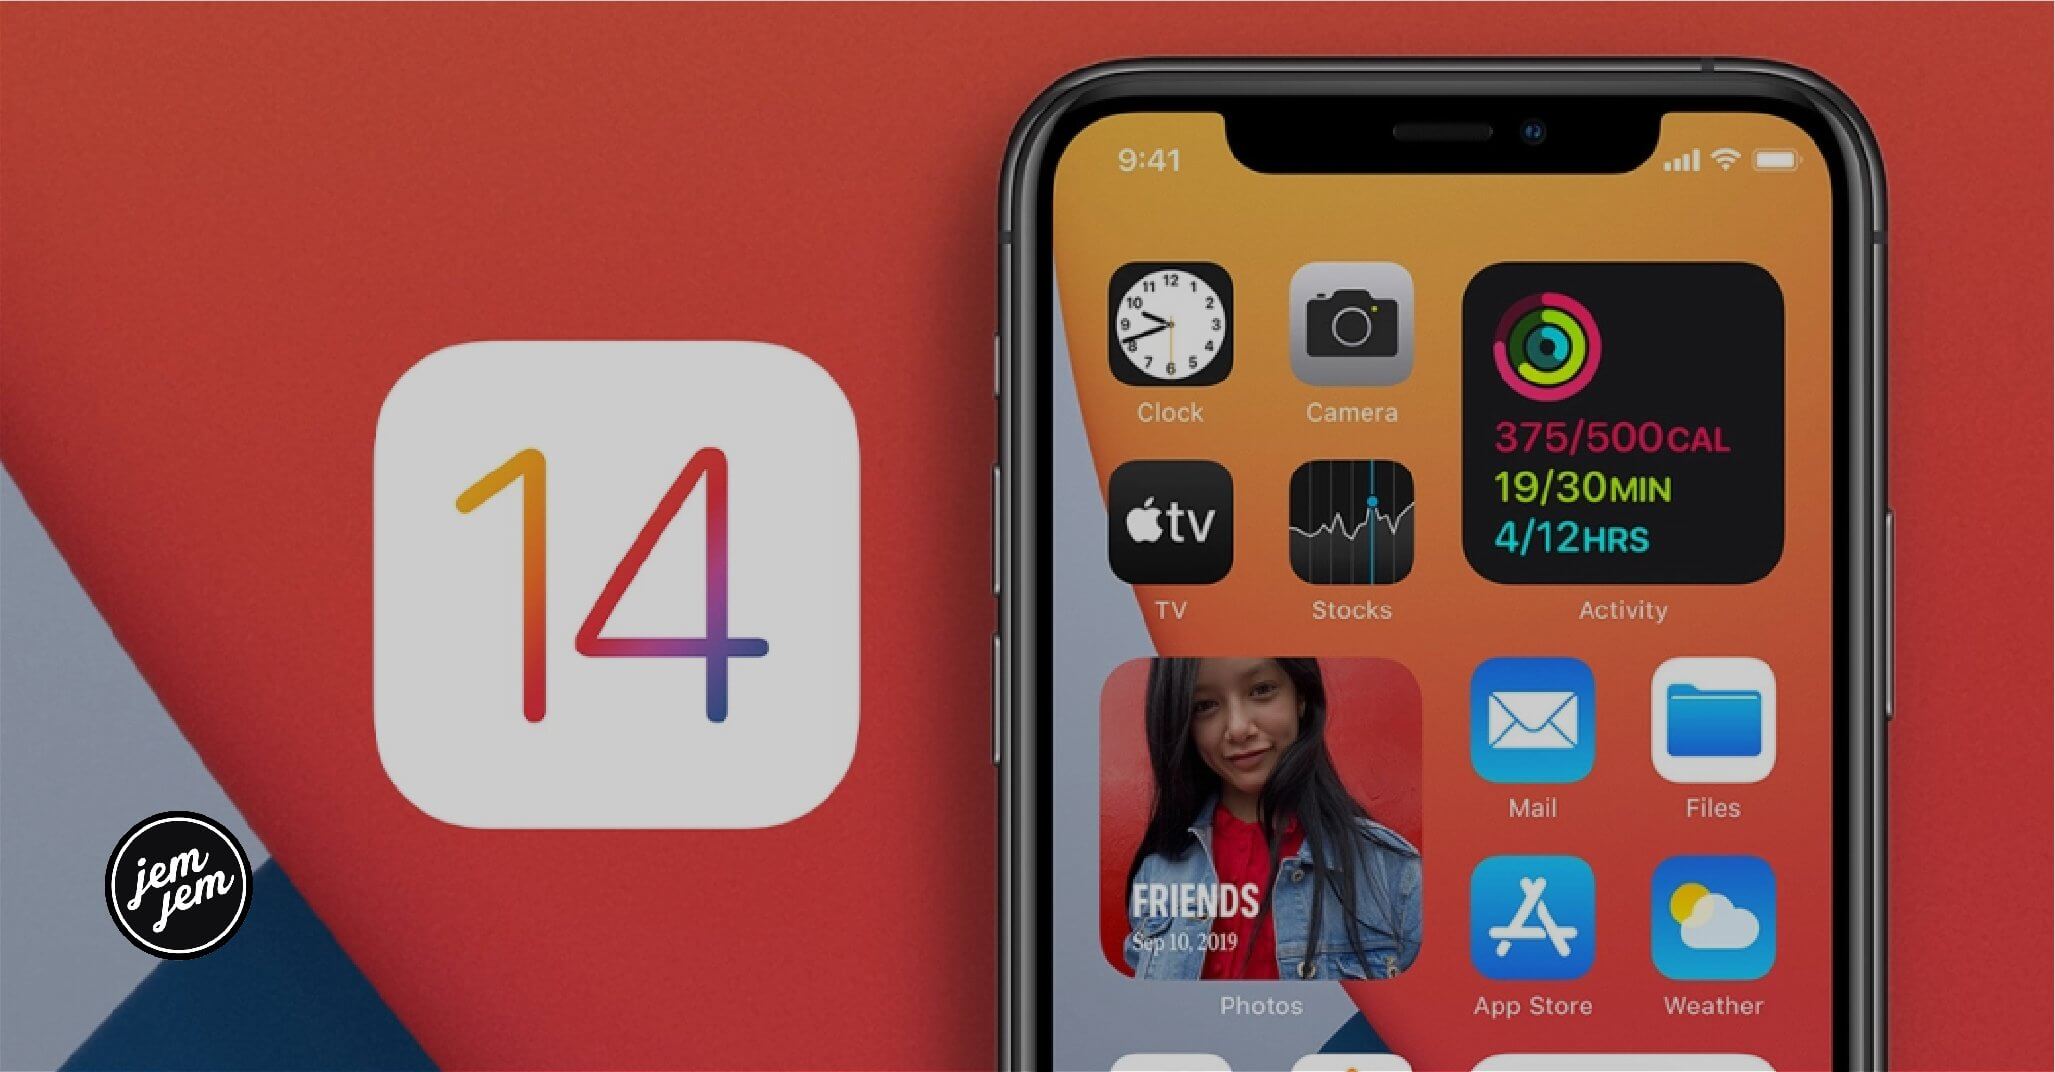 Apple’s iOS 14 brings big changes to your iPhone